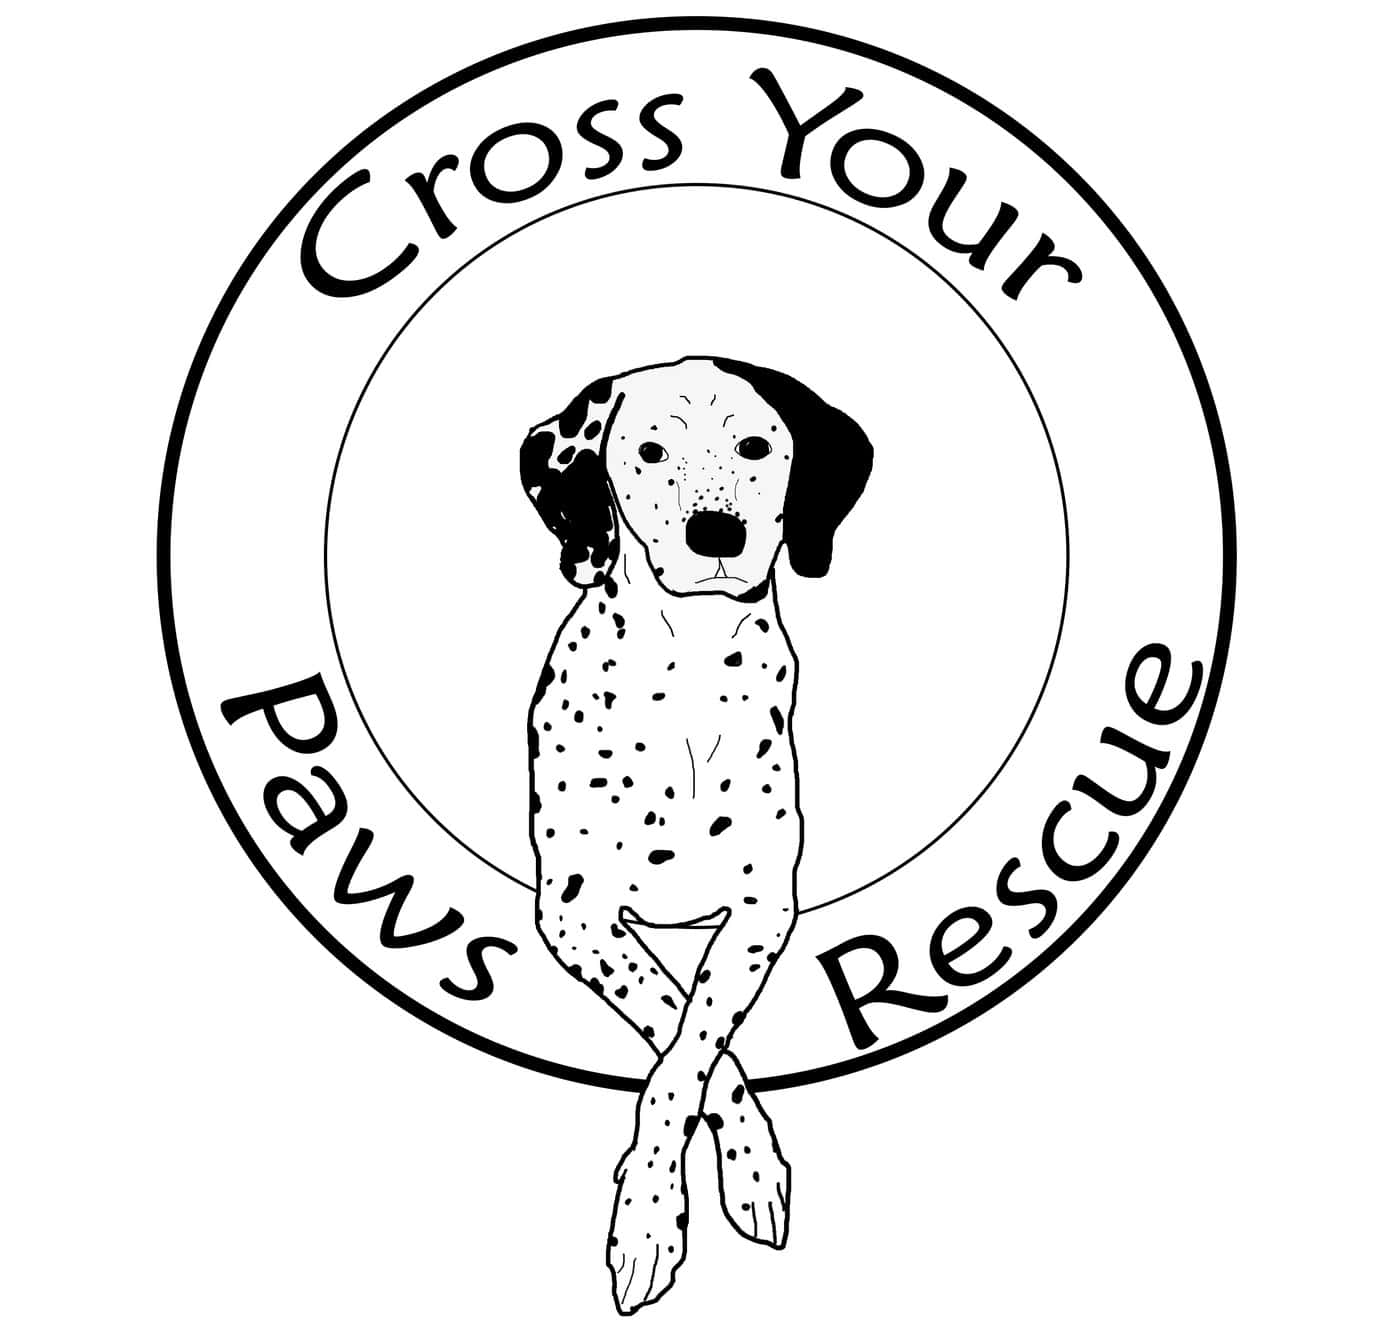 Cross Your Paws logo